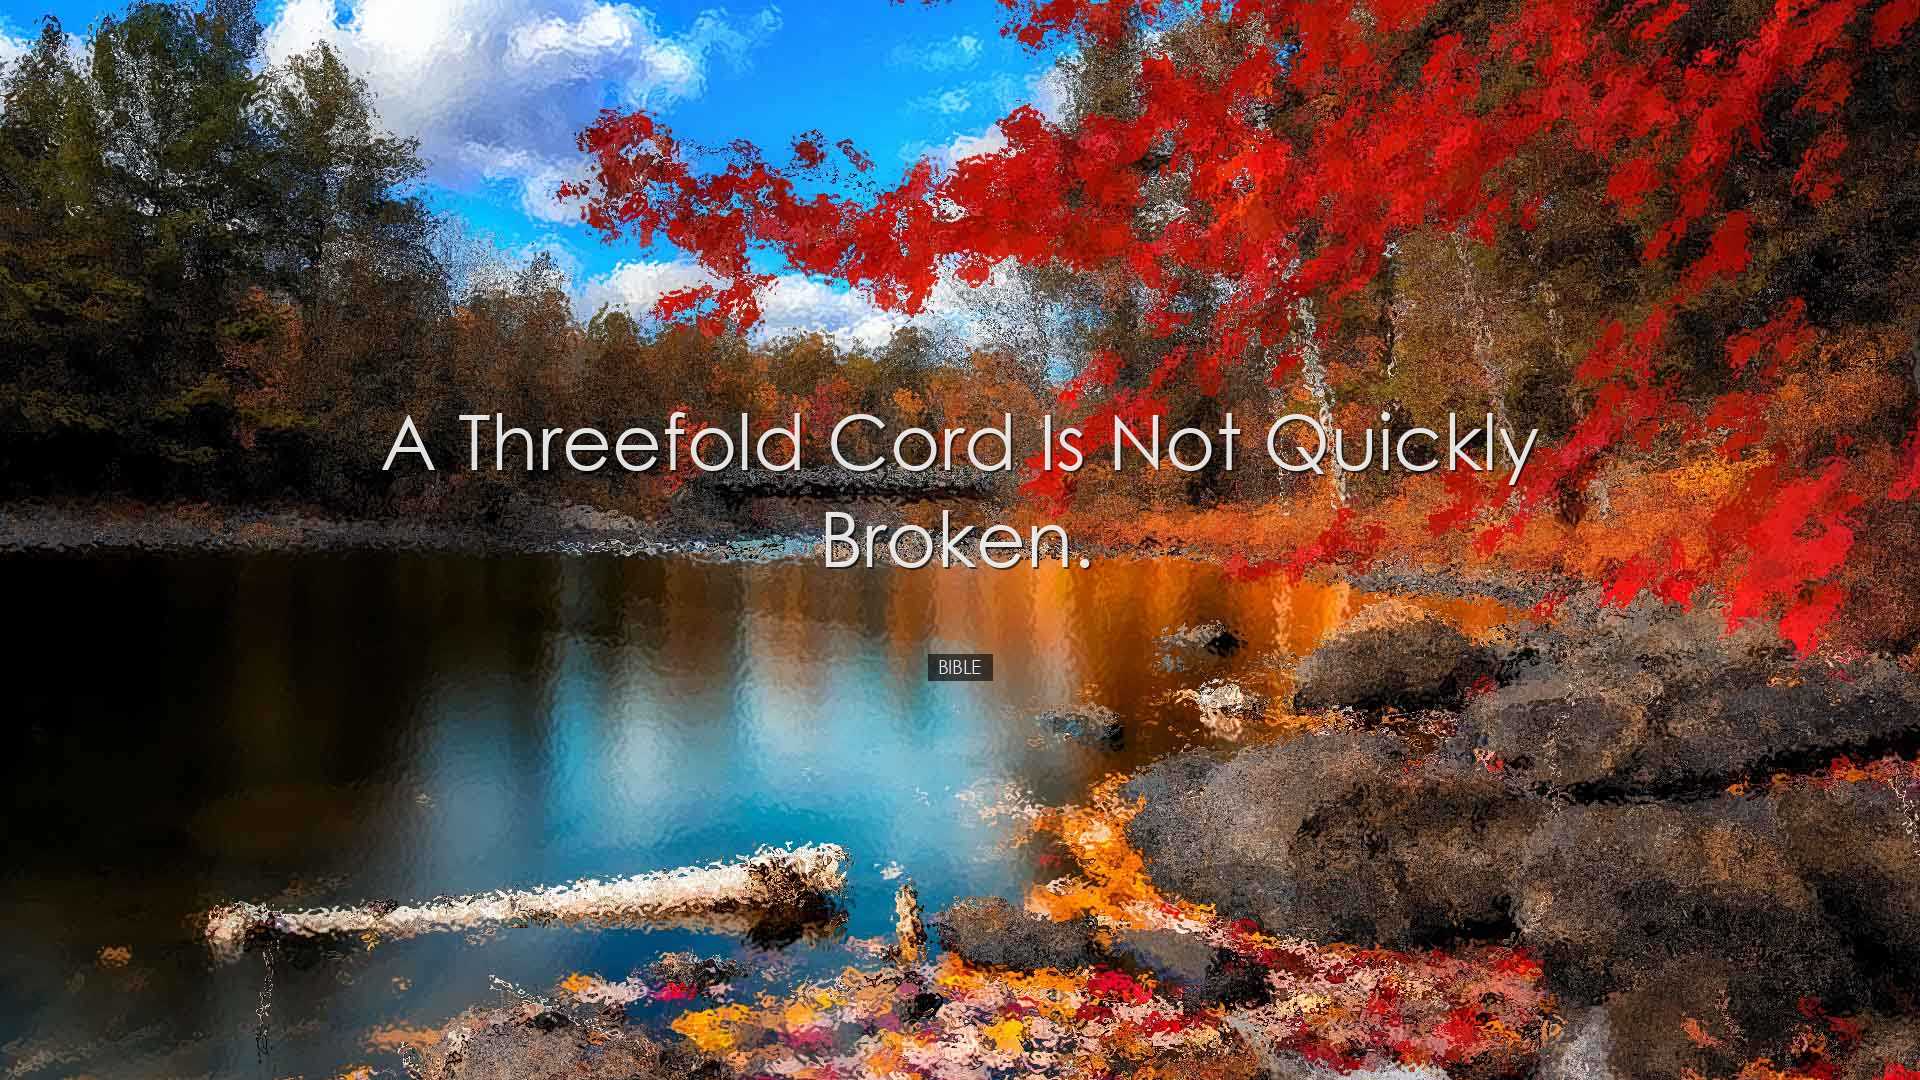 A threefold cord is not quickly broken. - Bible